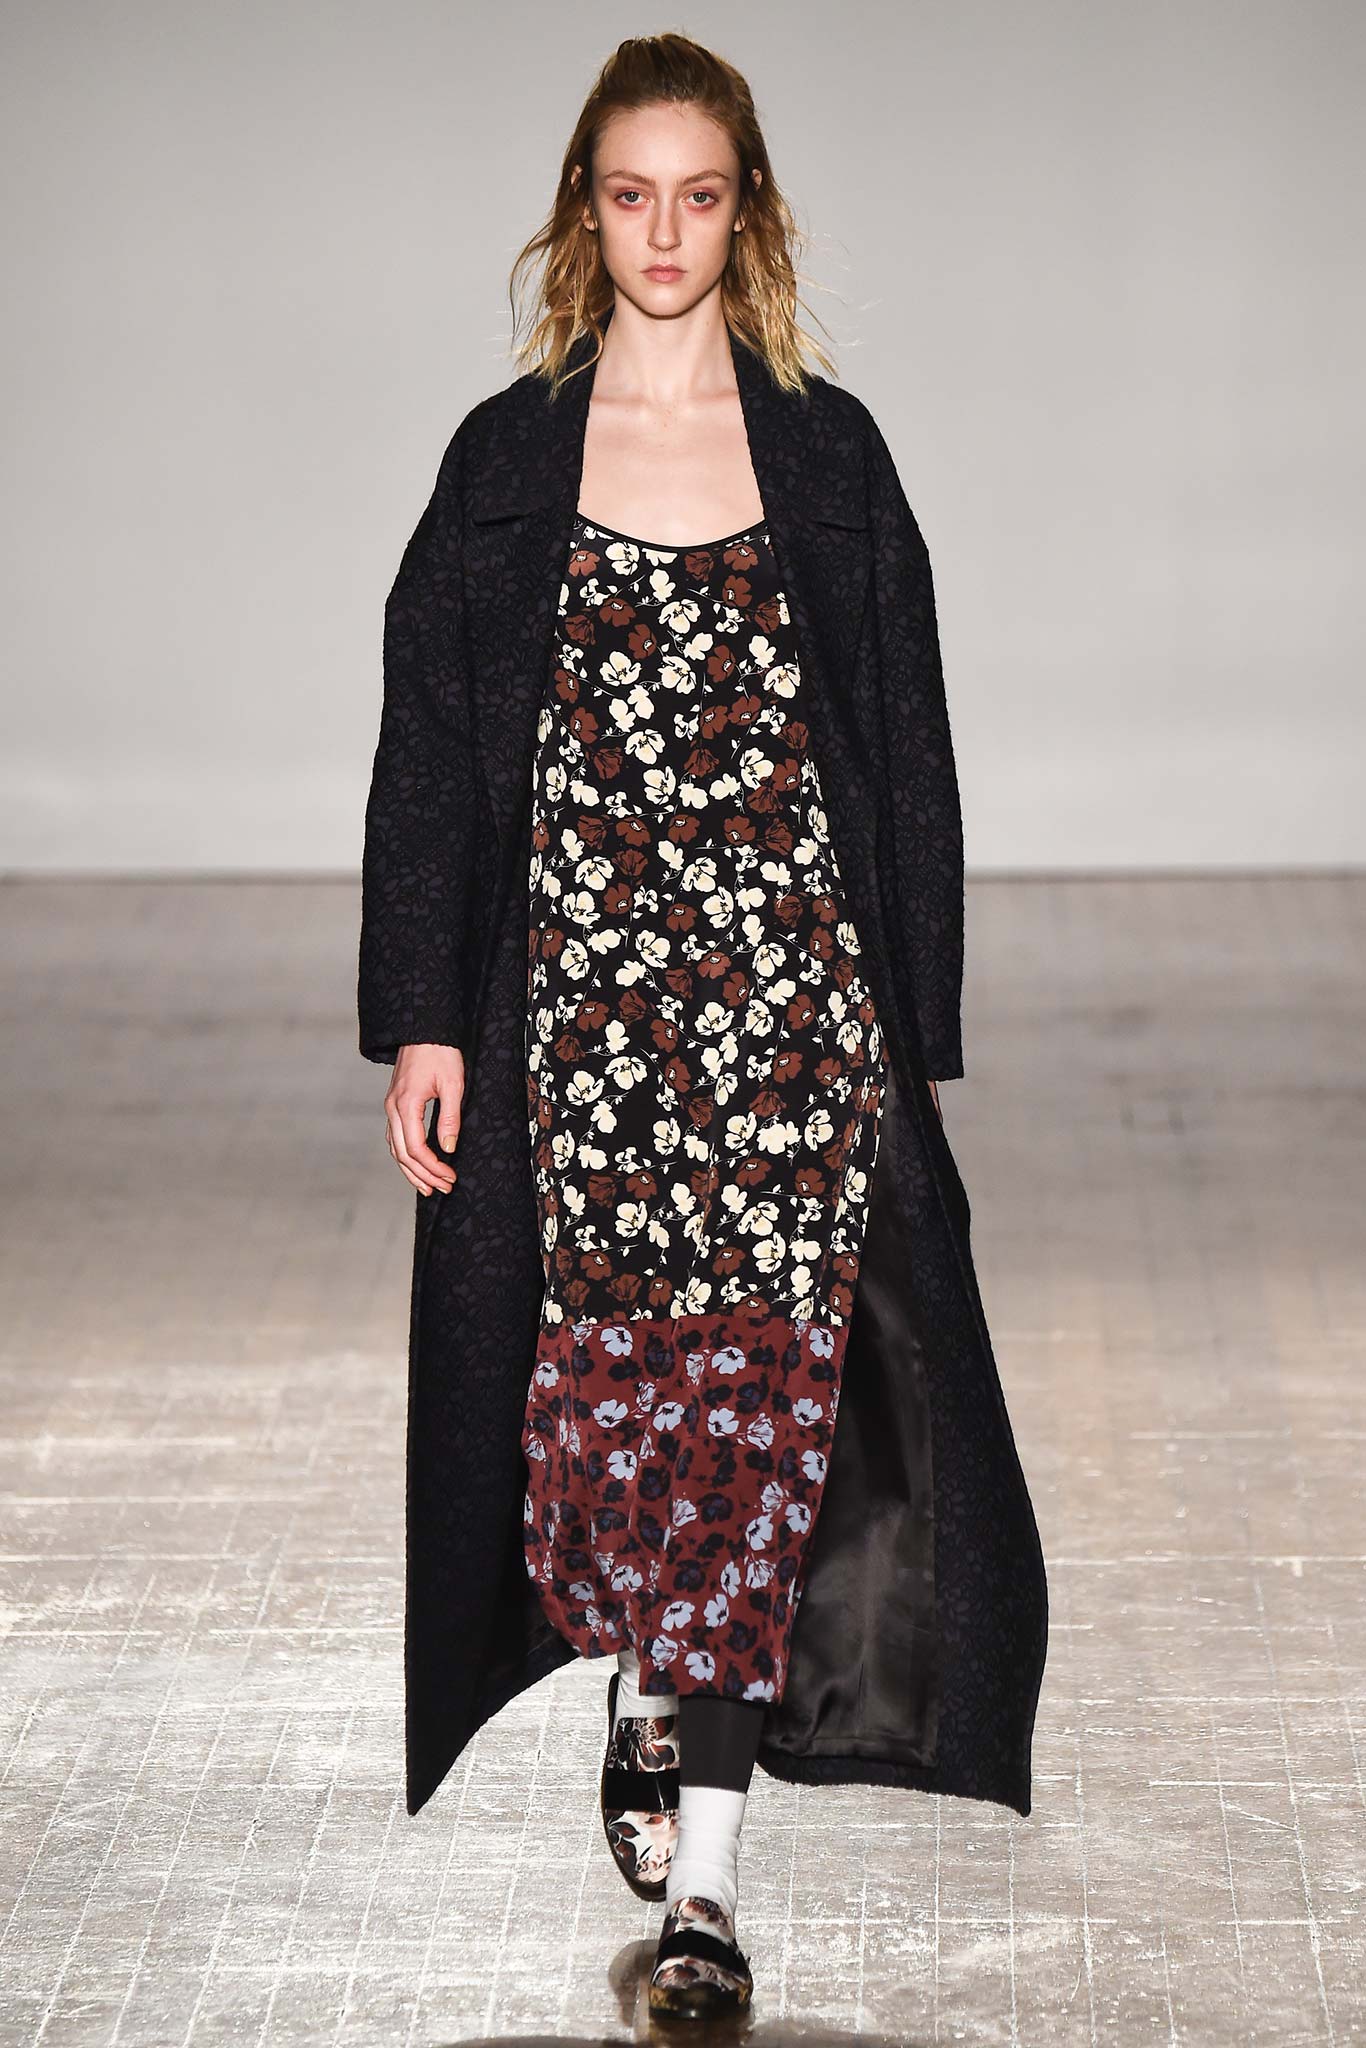 MOTHER OF PEARL AUTUMN/WINTER 2015-16 READY-TO-WEAR LONDON FASHION WEEK